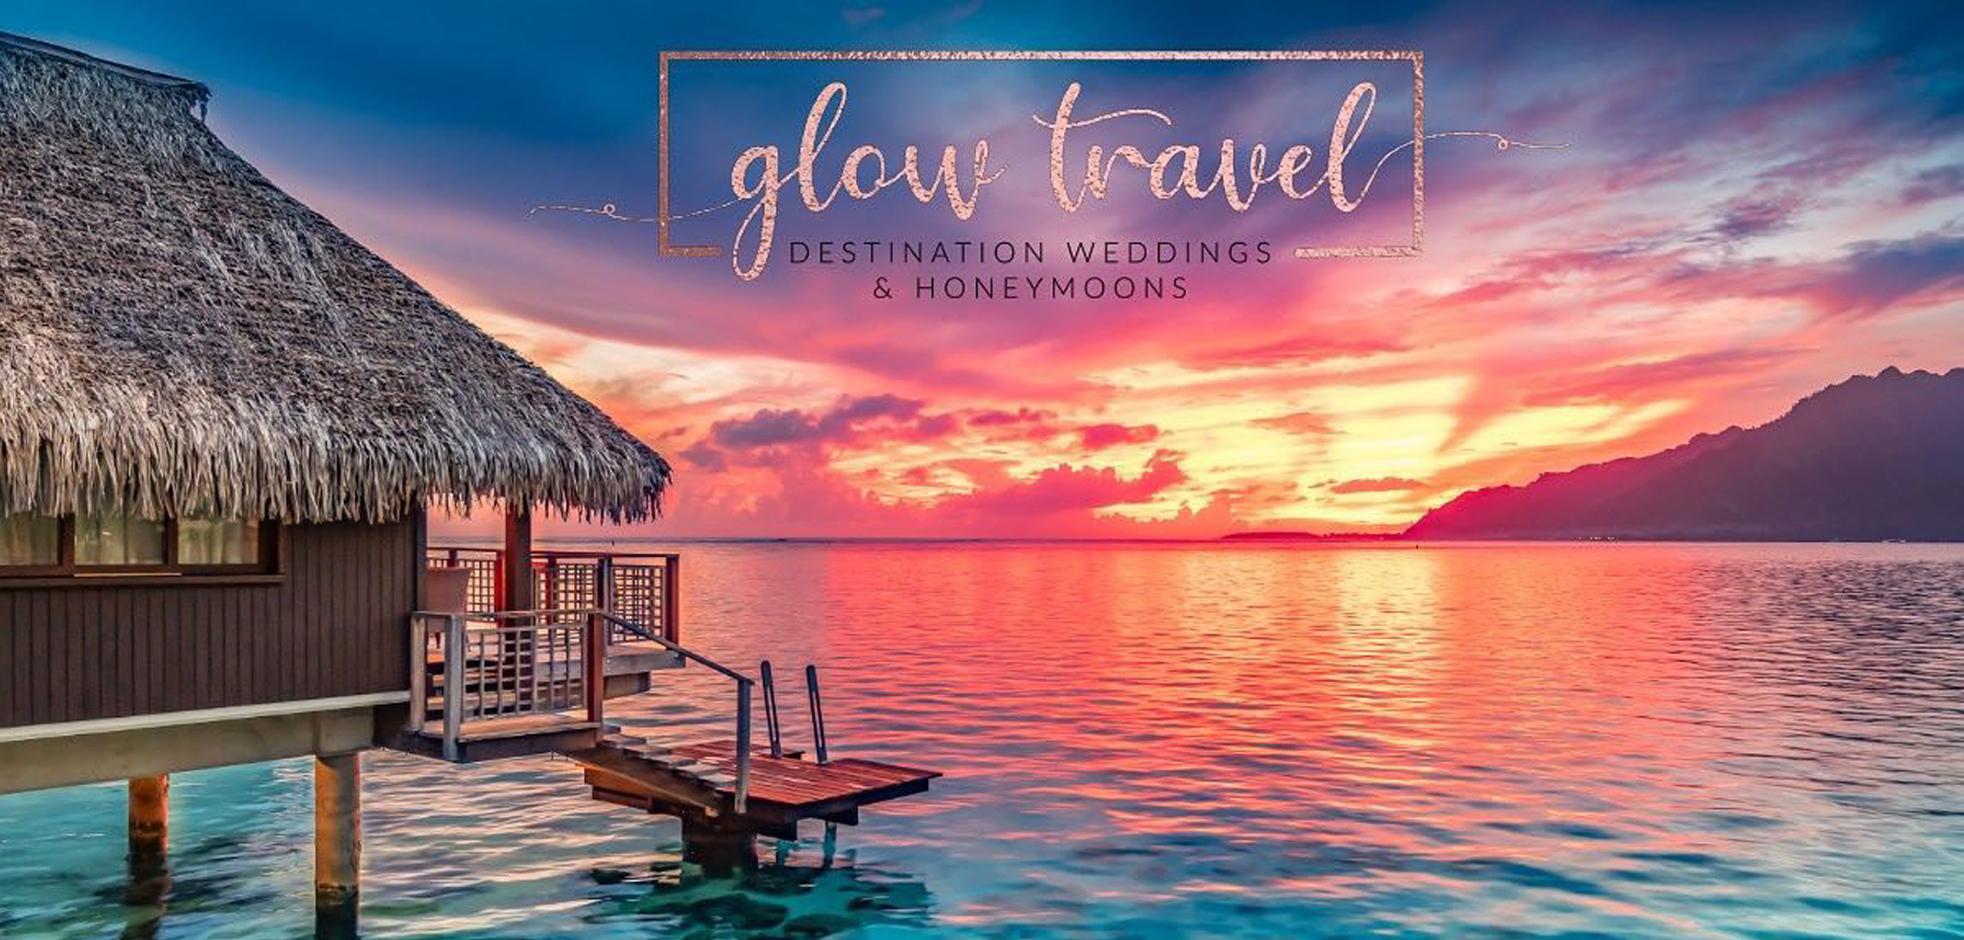 Glow Travel and Events